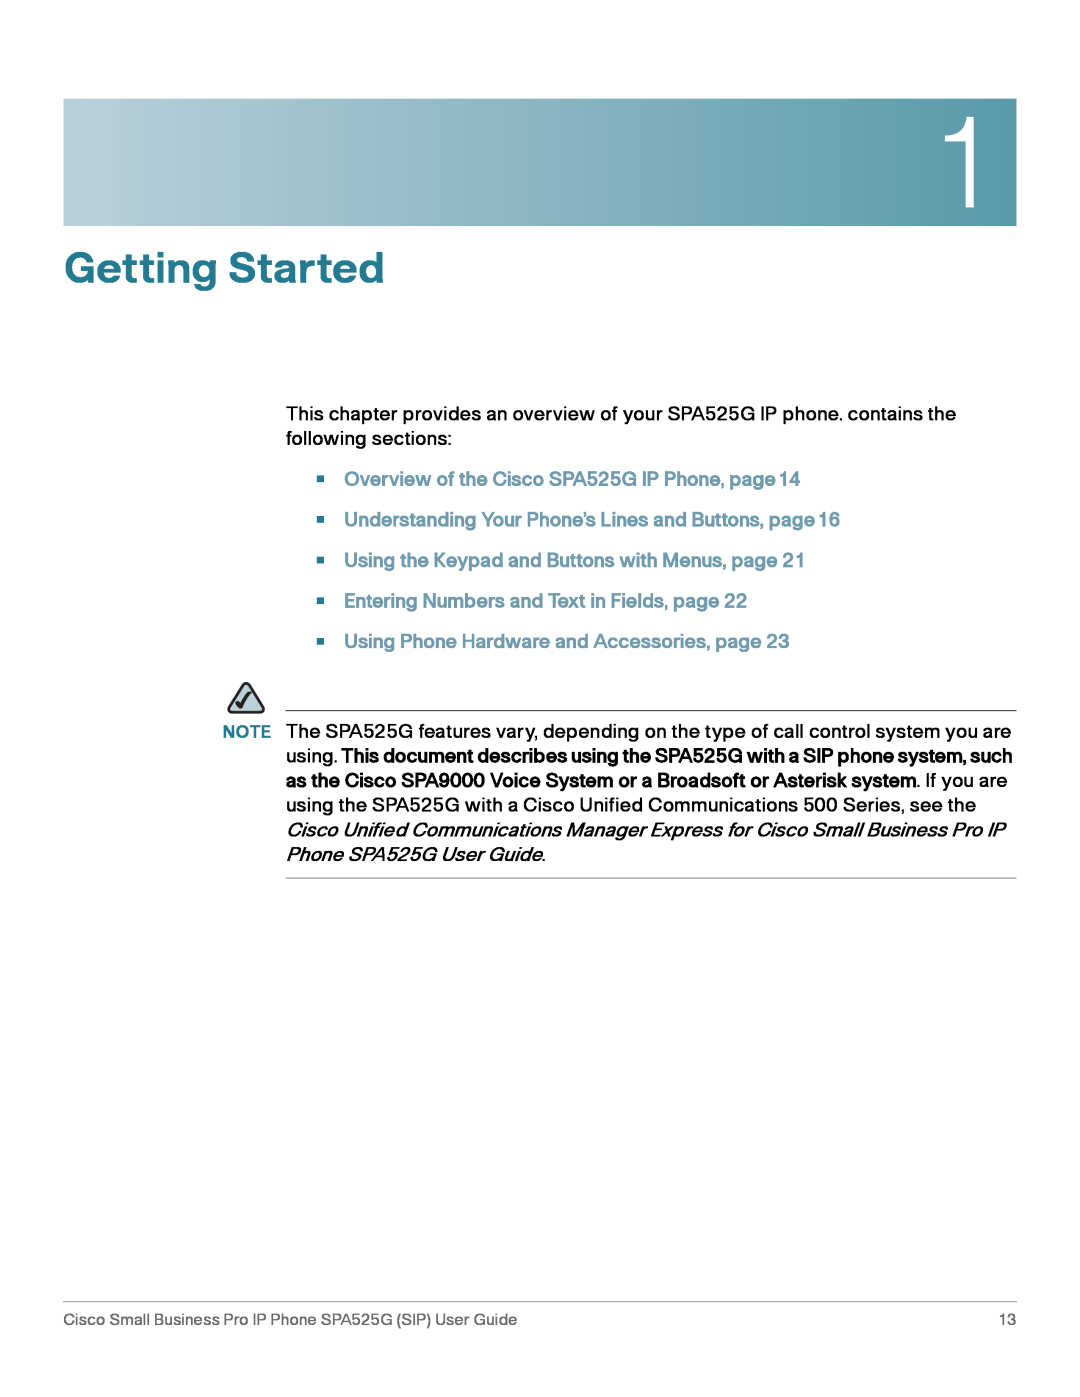 Cisco Systems manual Getting Started, Overview of the Cisco SPA525G IP Phone, page14 